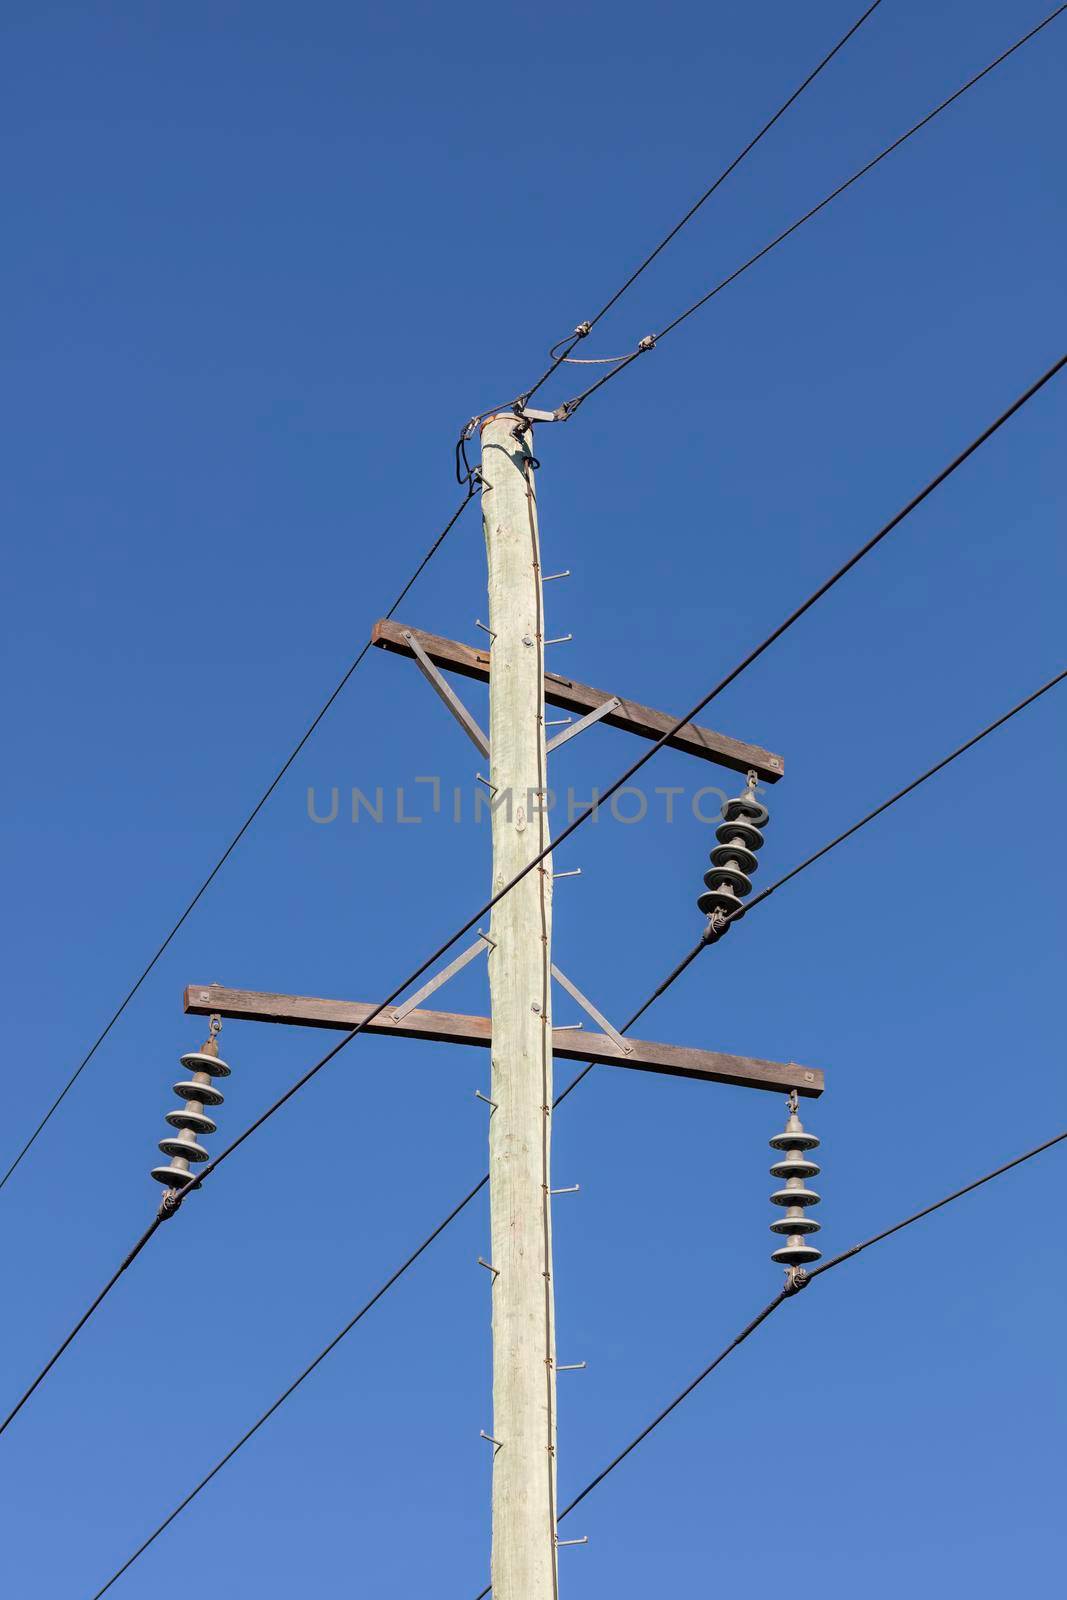 Photograph of a wooden telephone post and cables against a blue sky